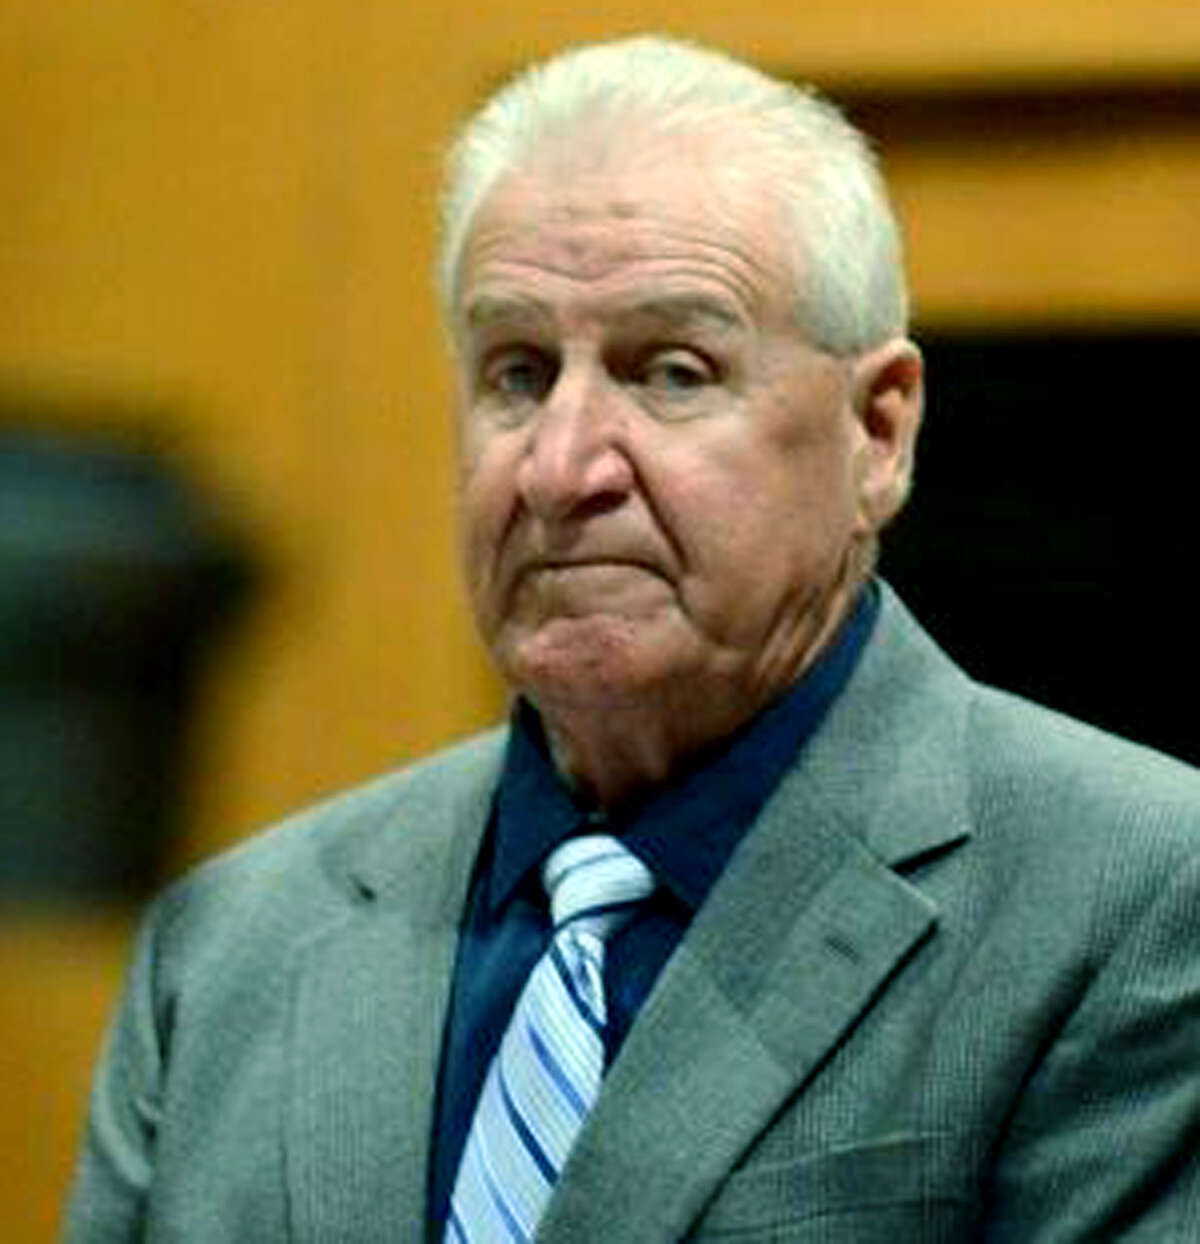 A jury convicted Dominic Badaraccoin July of trying to bribe a judge to influence a grand jury probe in the case of the Sherman disappearance of his ex-wife, Mary Badaracco. July 2013 Photo by Autumn Driscoll